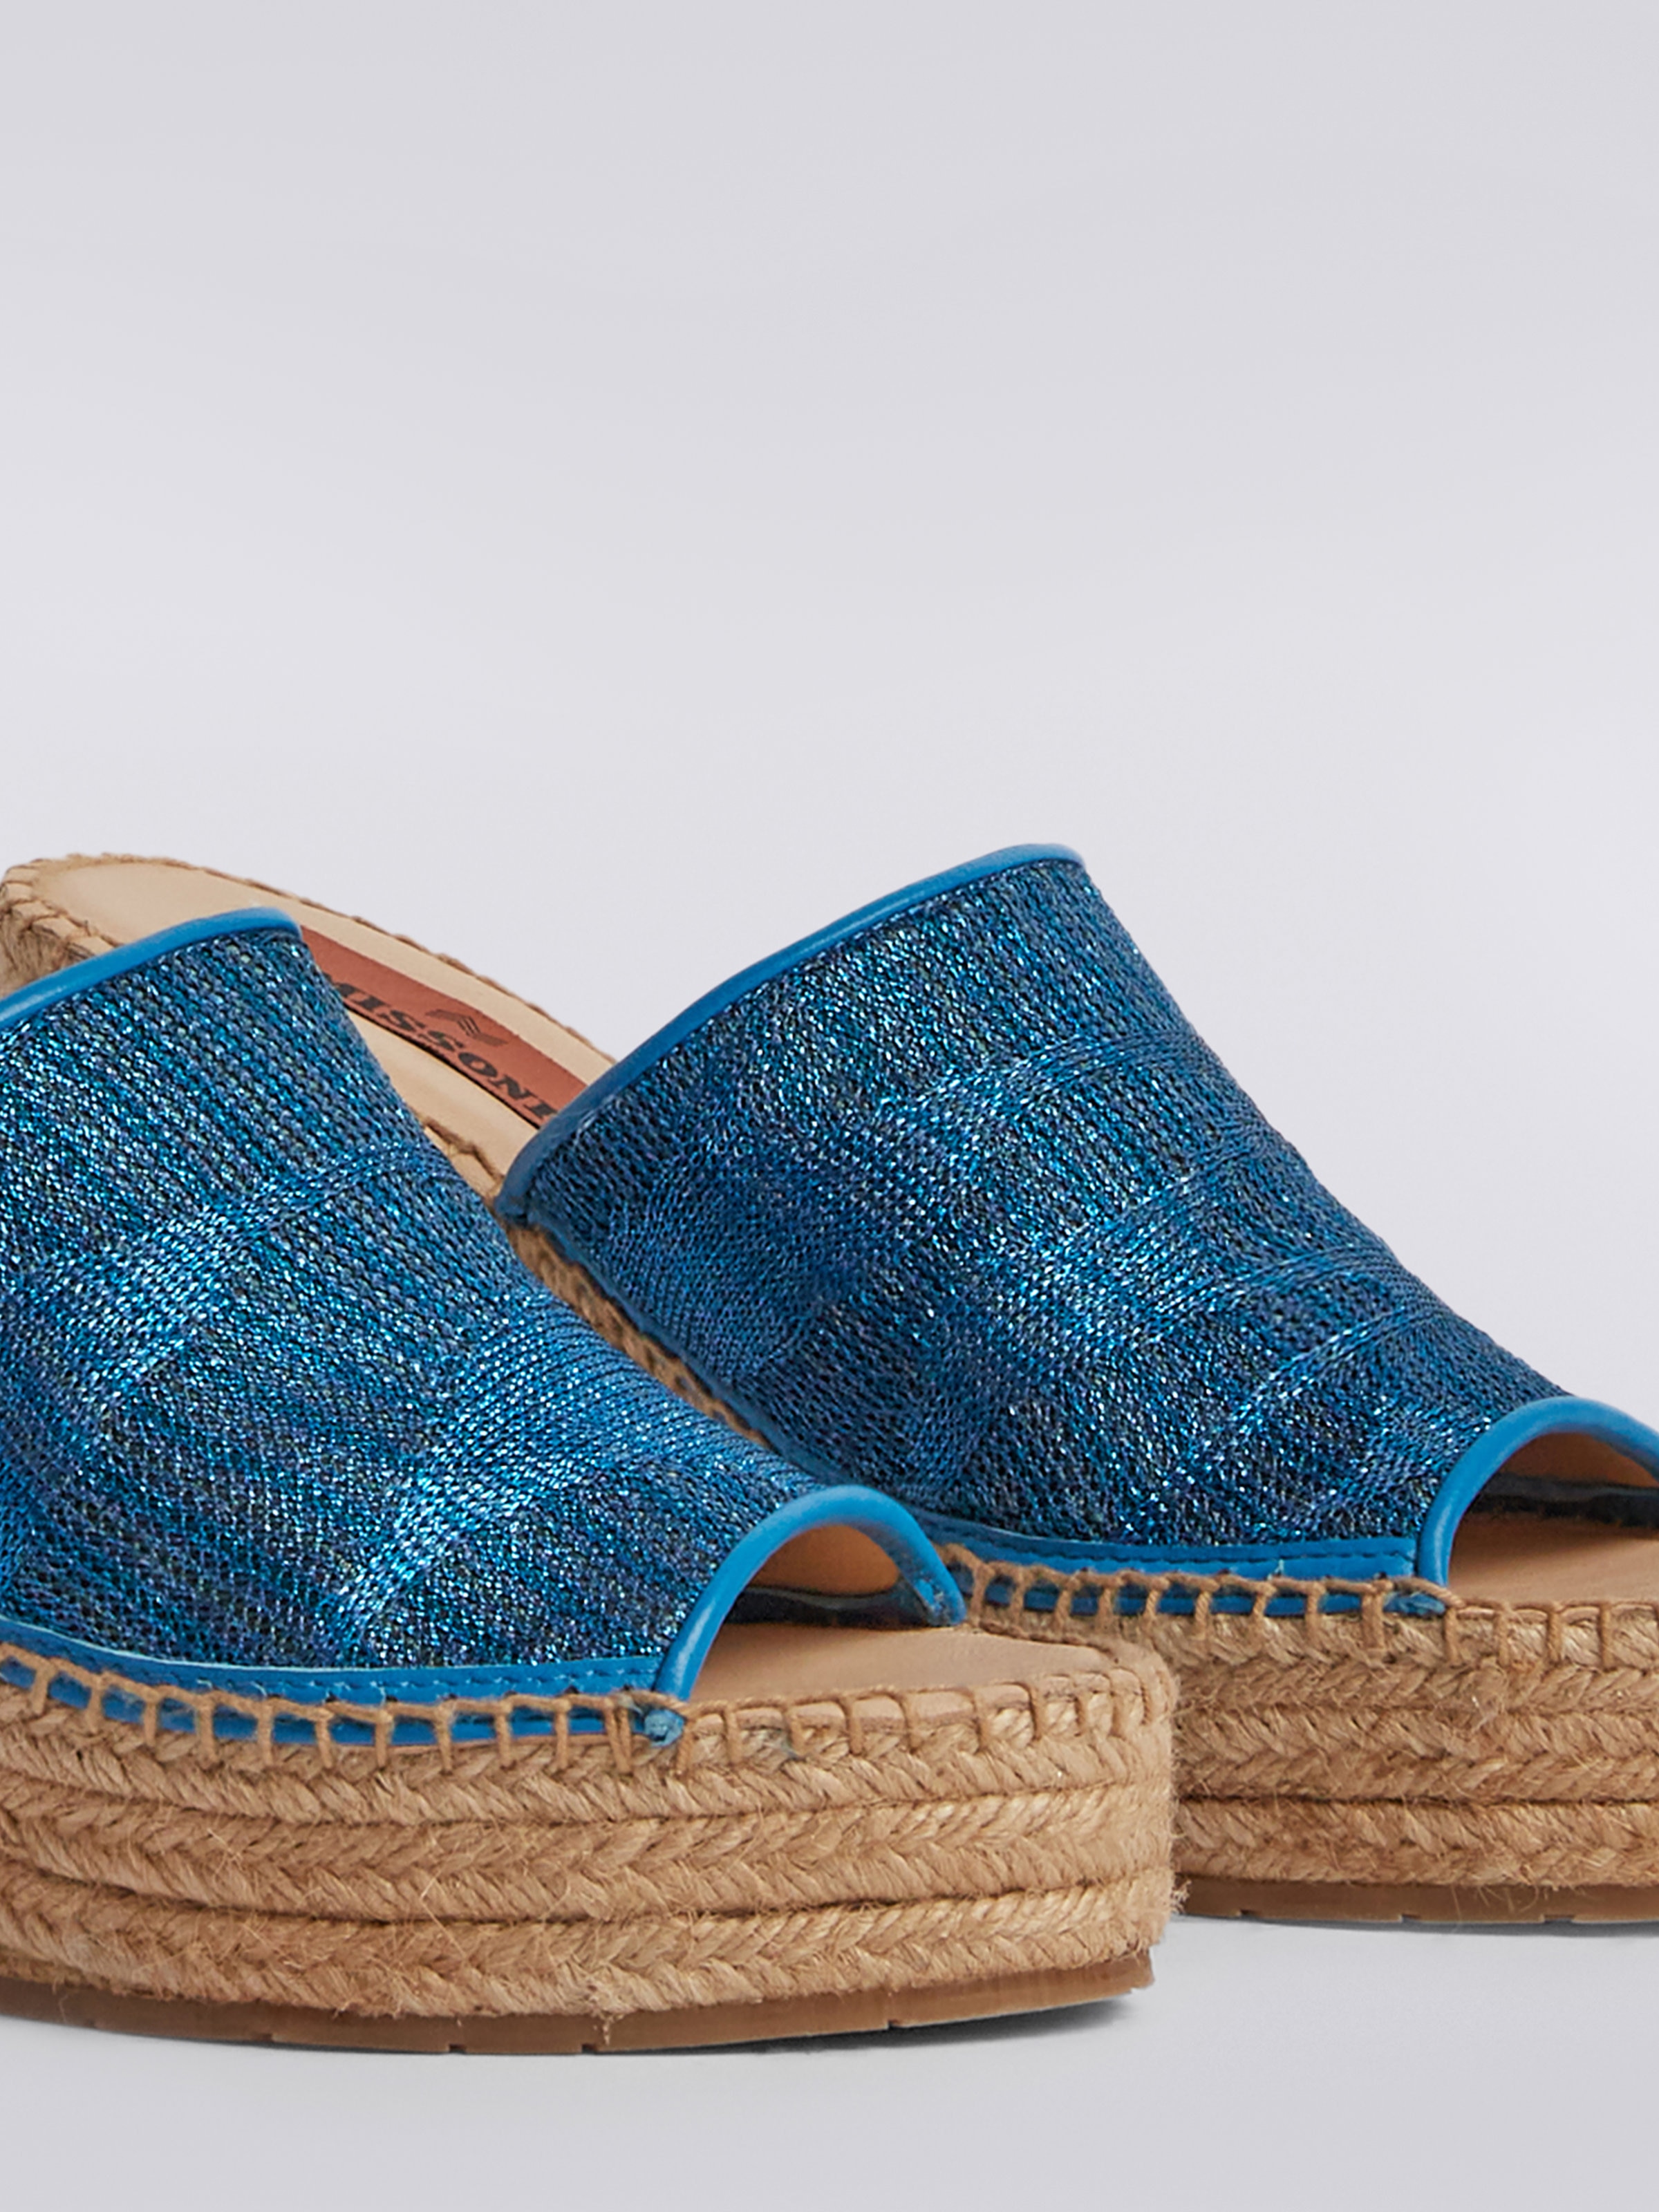 Espadrilles with wedge and chevron knit band, Blue - 3